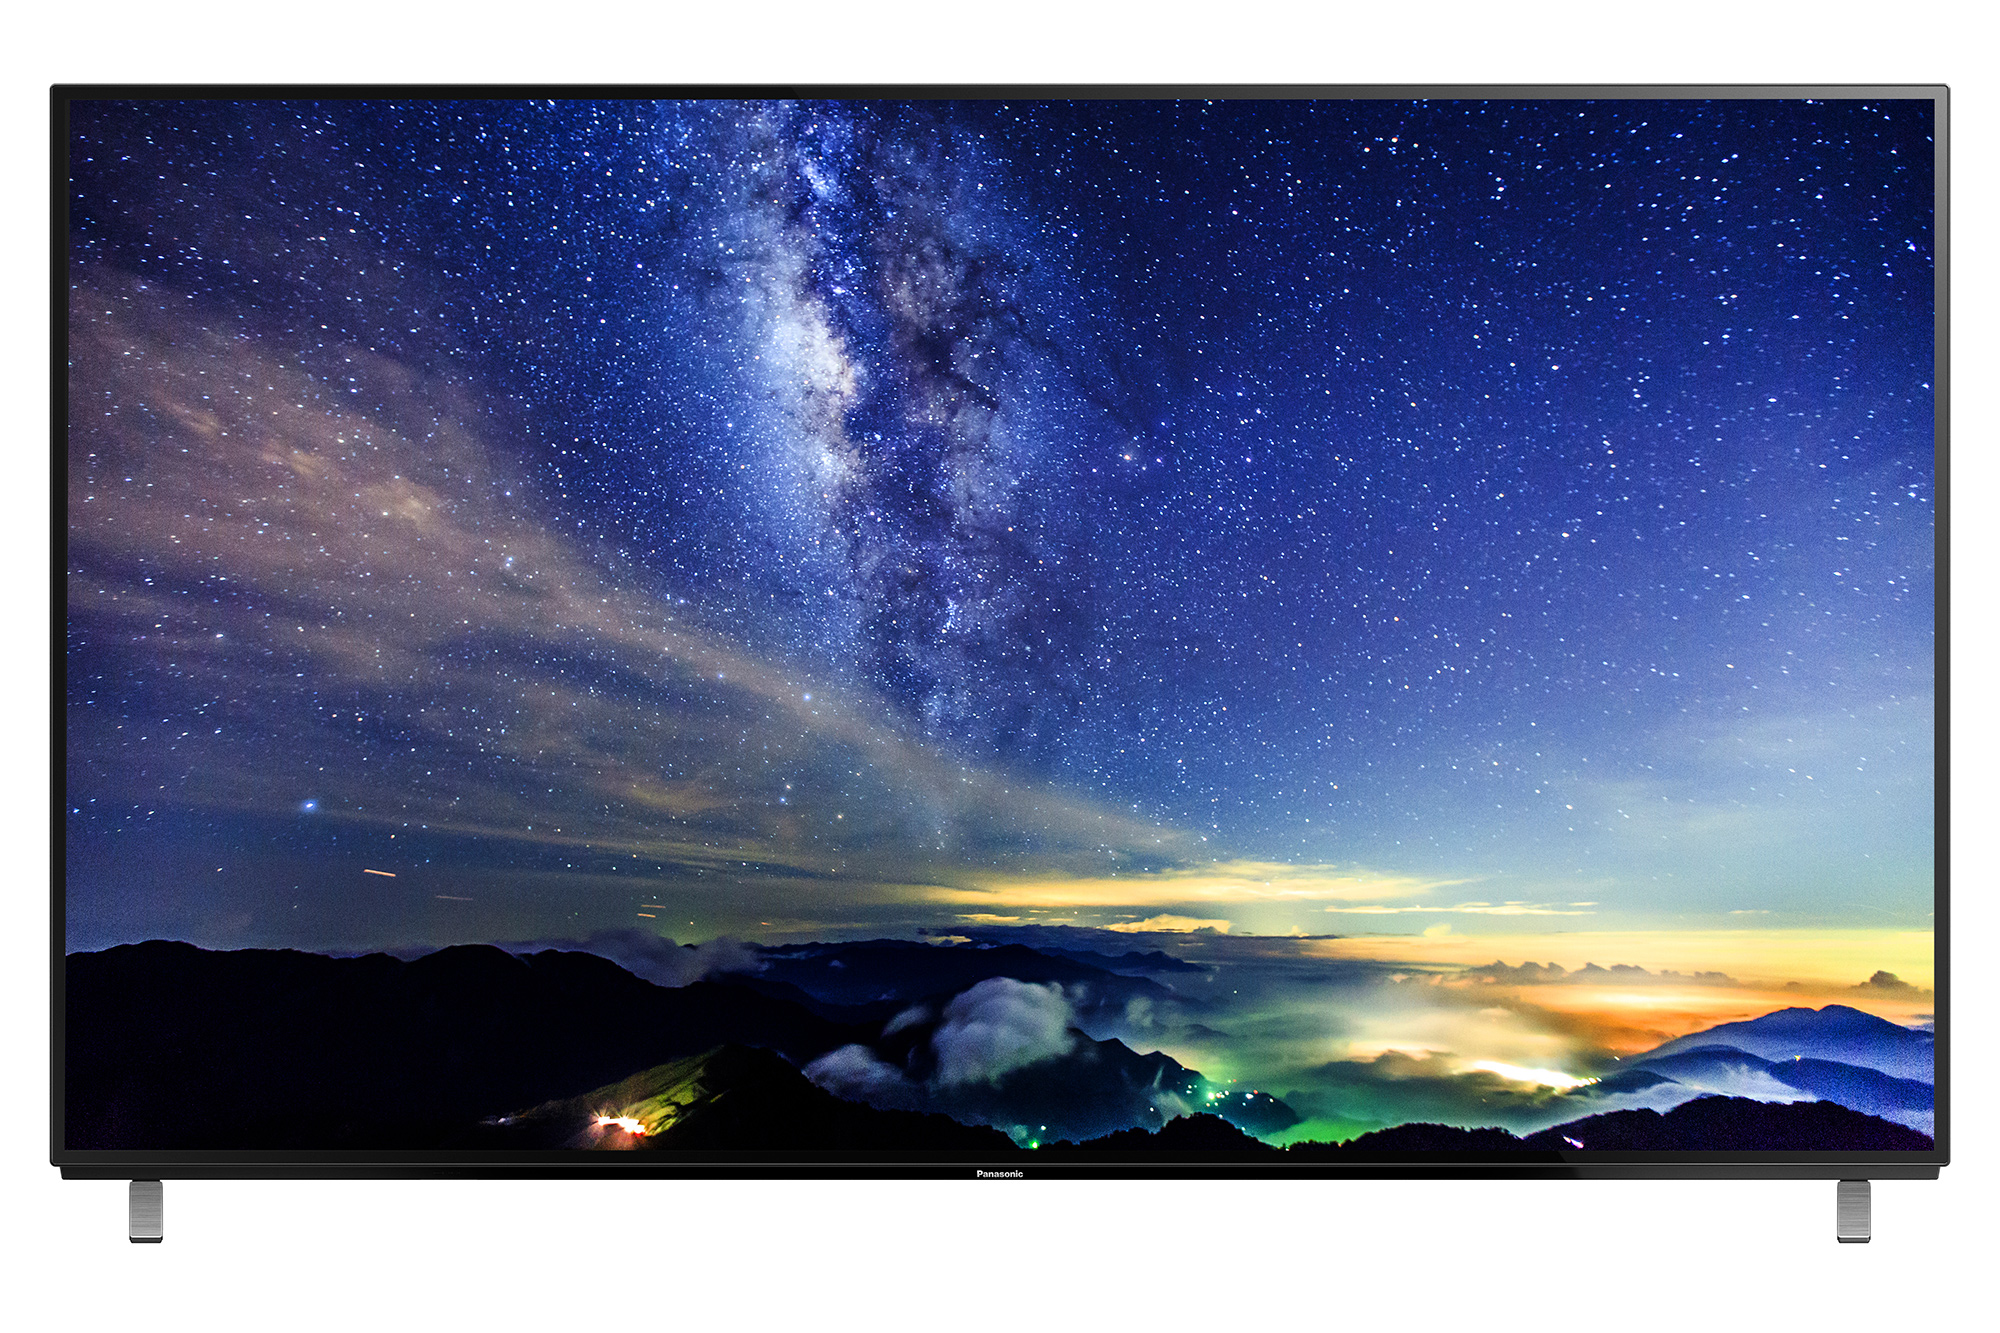 TH 65EZ950U Front Stand Screen REVIEW: Panasonic OLED Tempts The Plasma Faithful